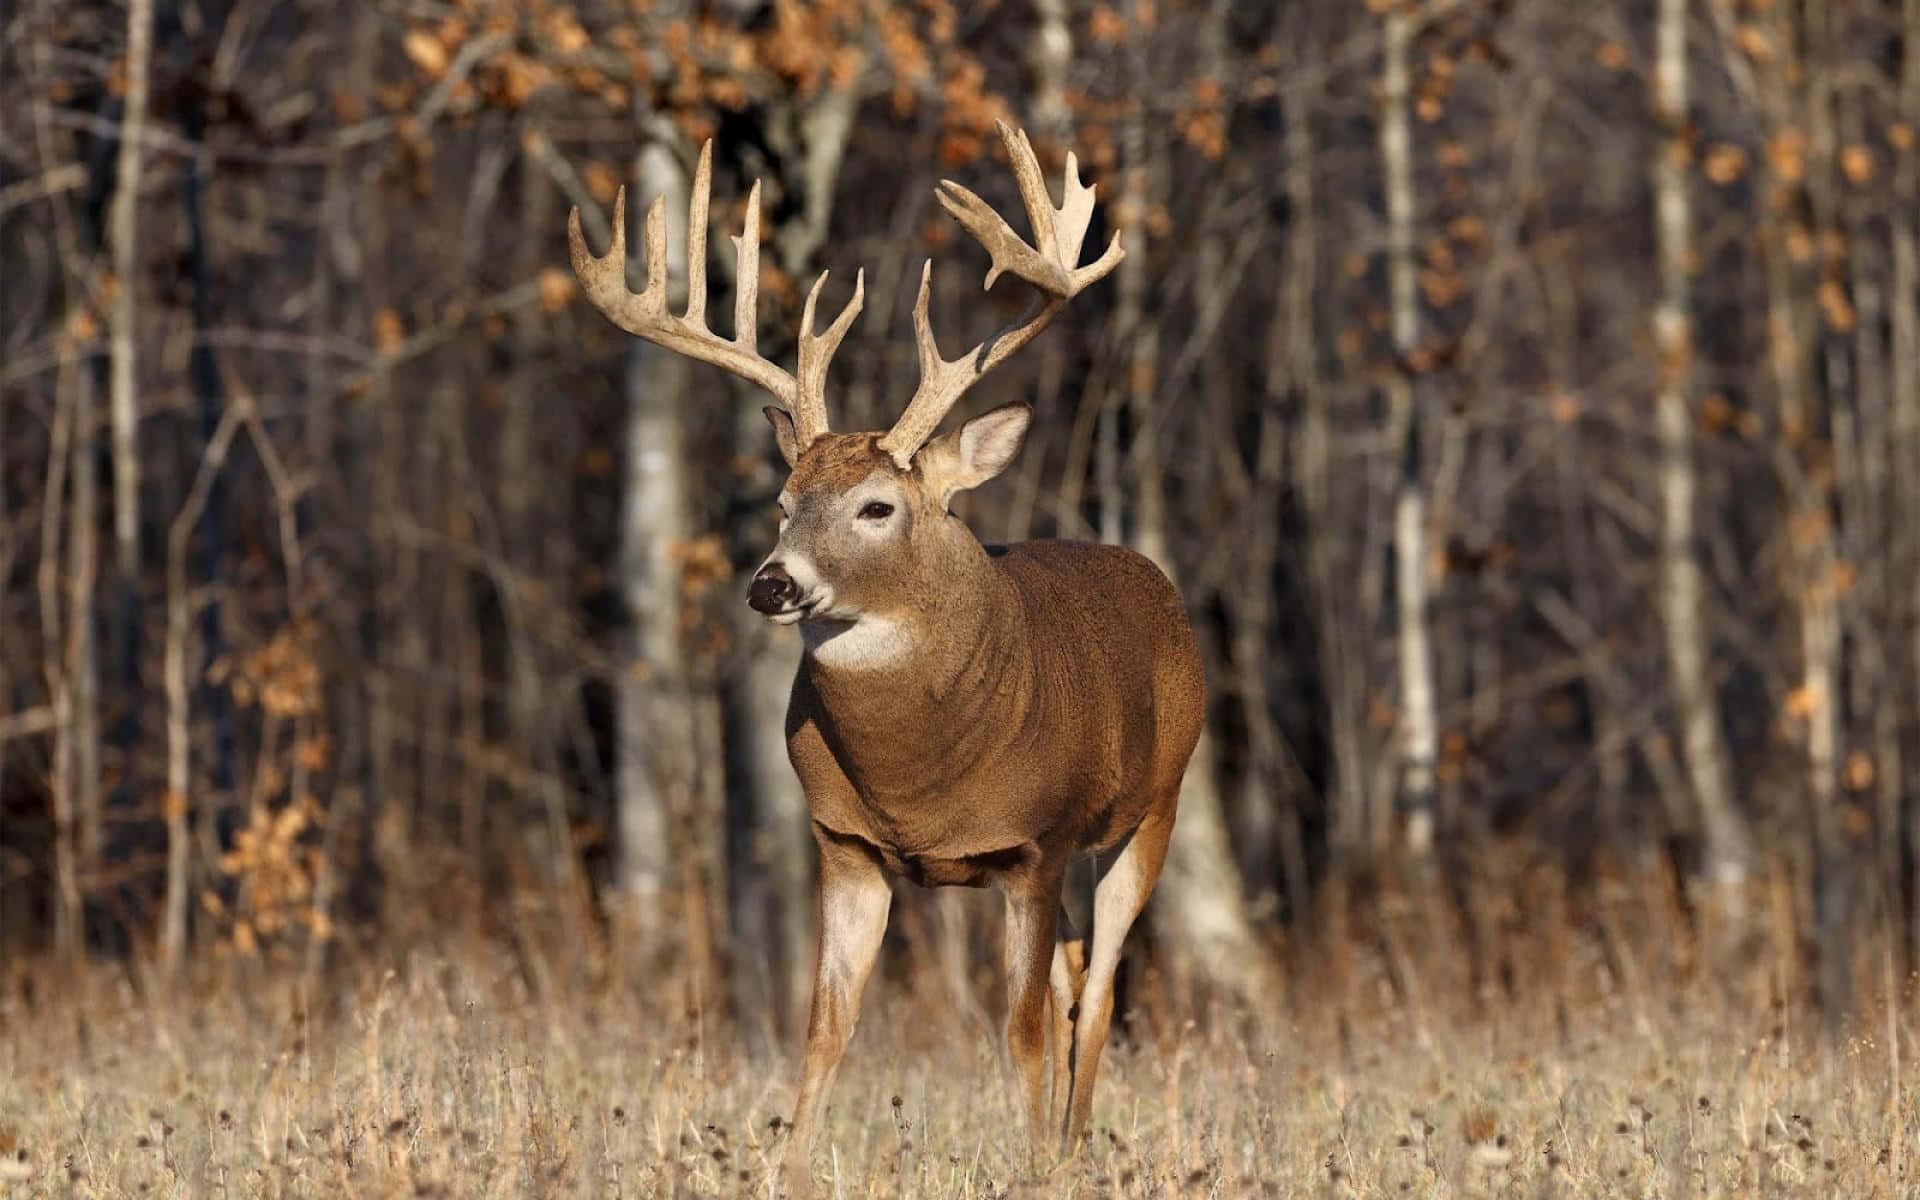 An up-close view of a buck in its natural habitat. Wallpaper